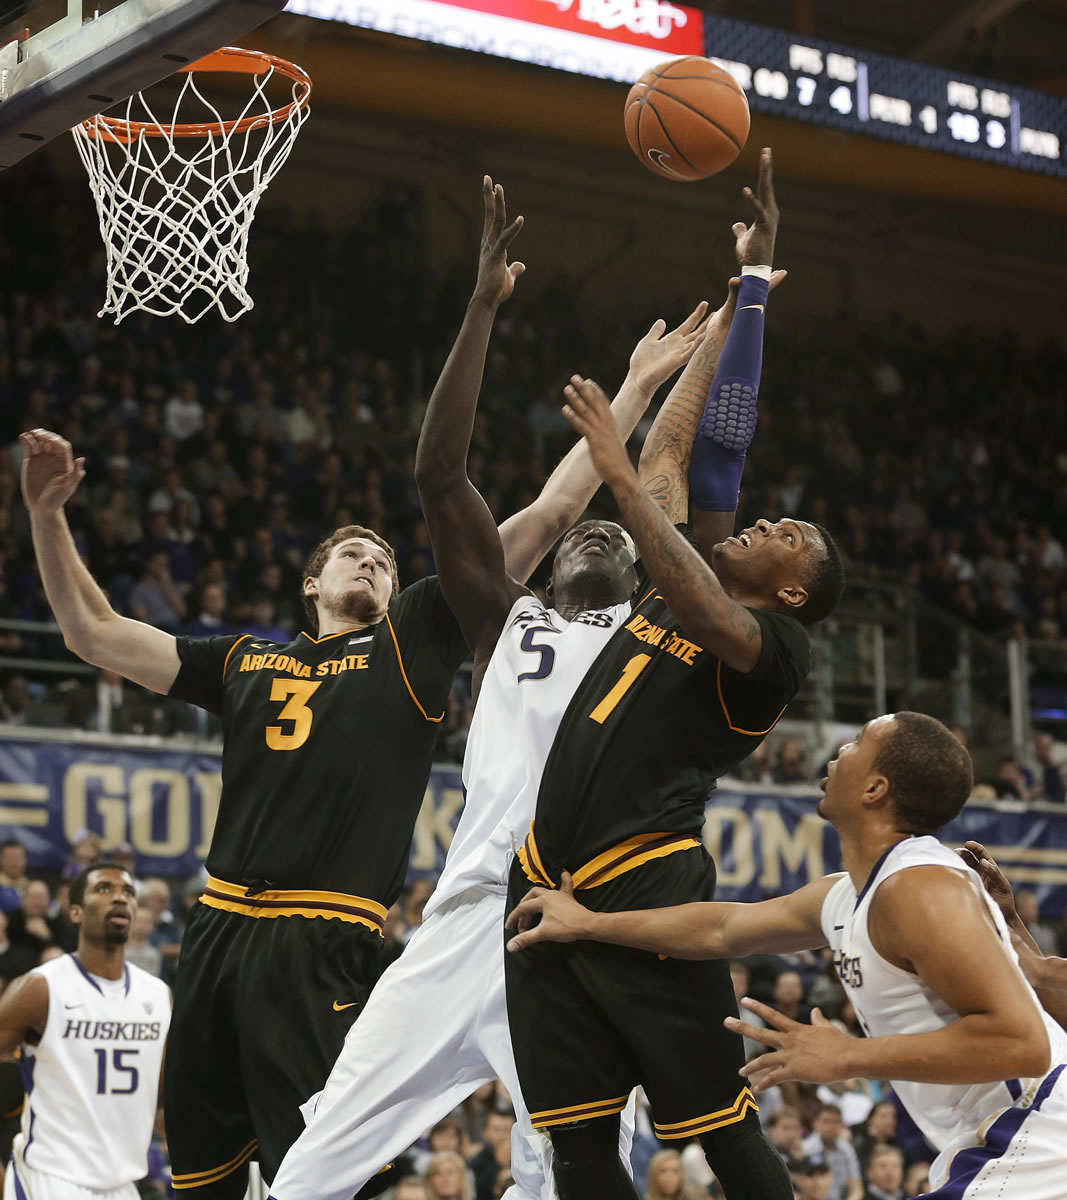 Washington's Aziz N'Diaye (5) tries to block a shot by Arizona State's Jahii Carson (1) as Arizona State's Eric Jacobsen (3) helps defend during the second half Saturday.